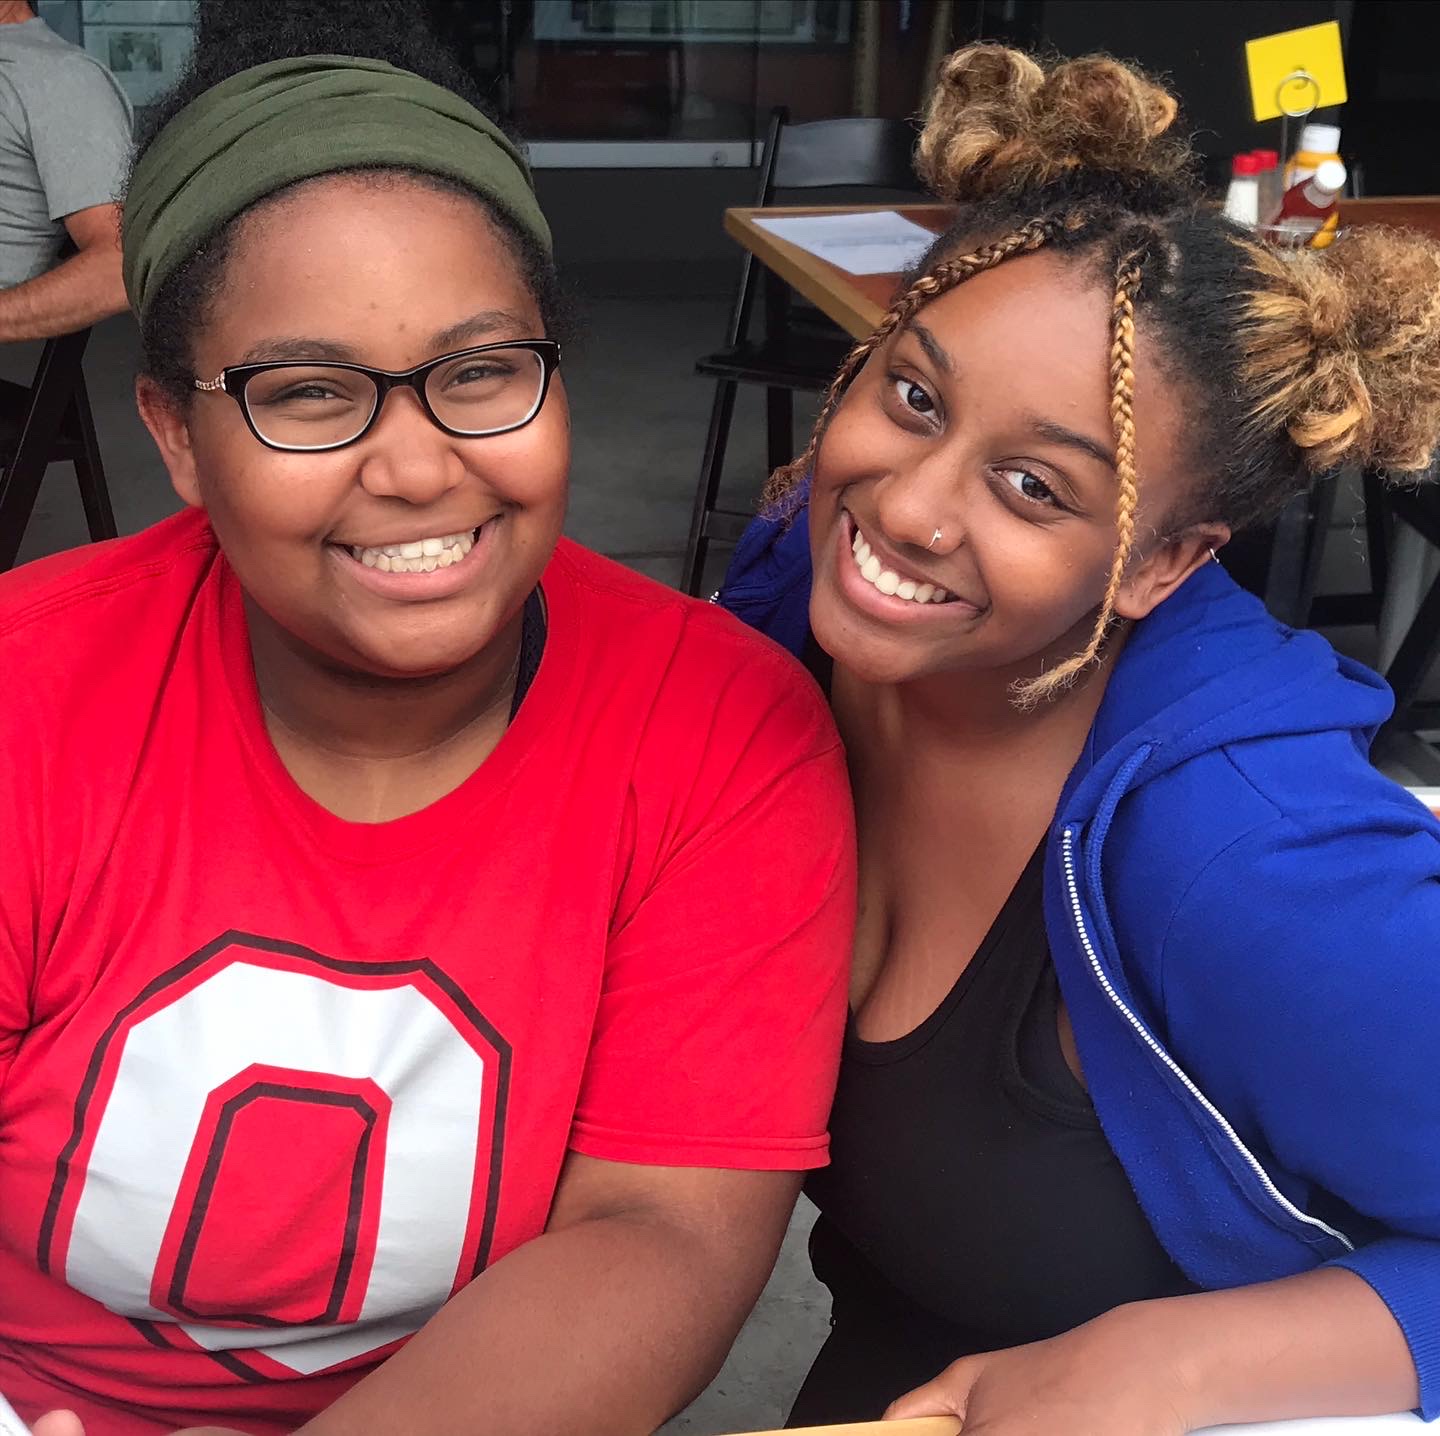 Two Black, female students are smiling.